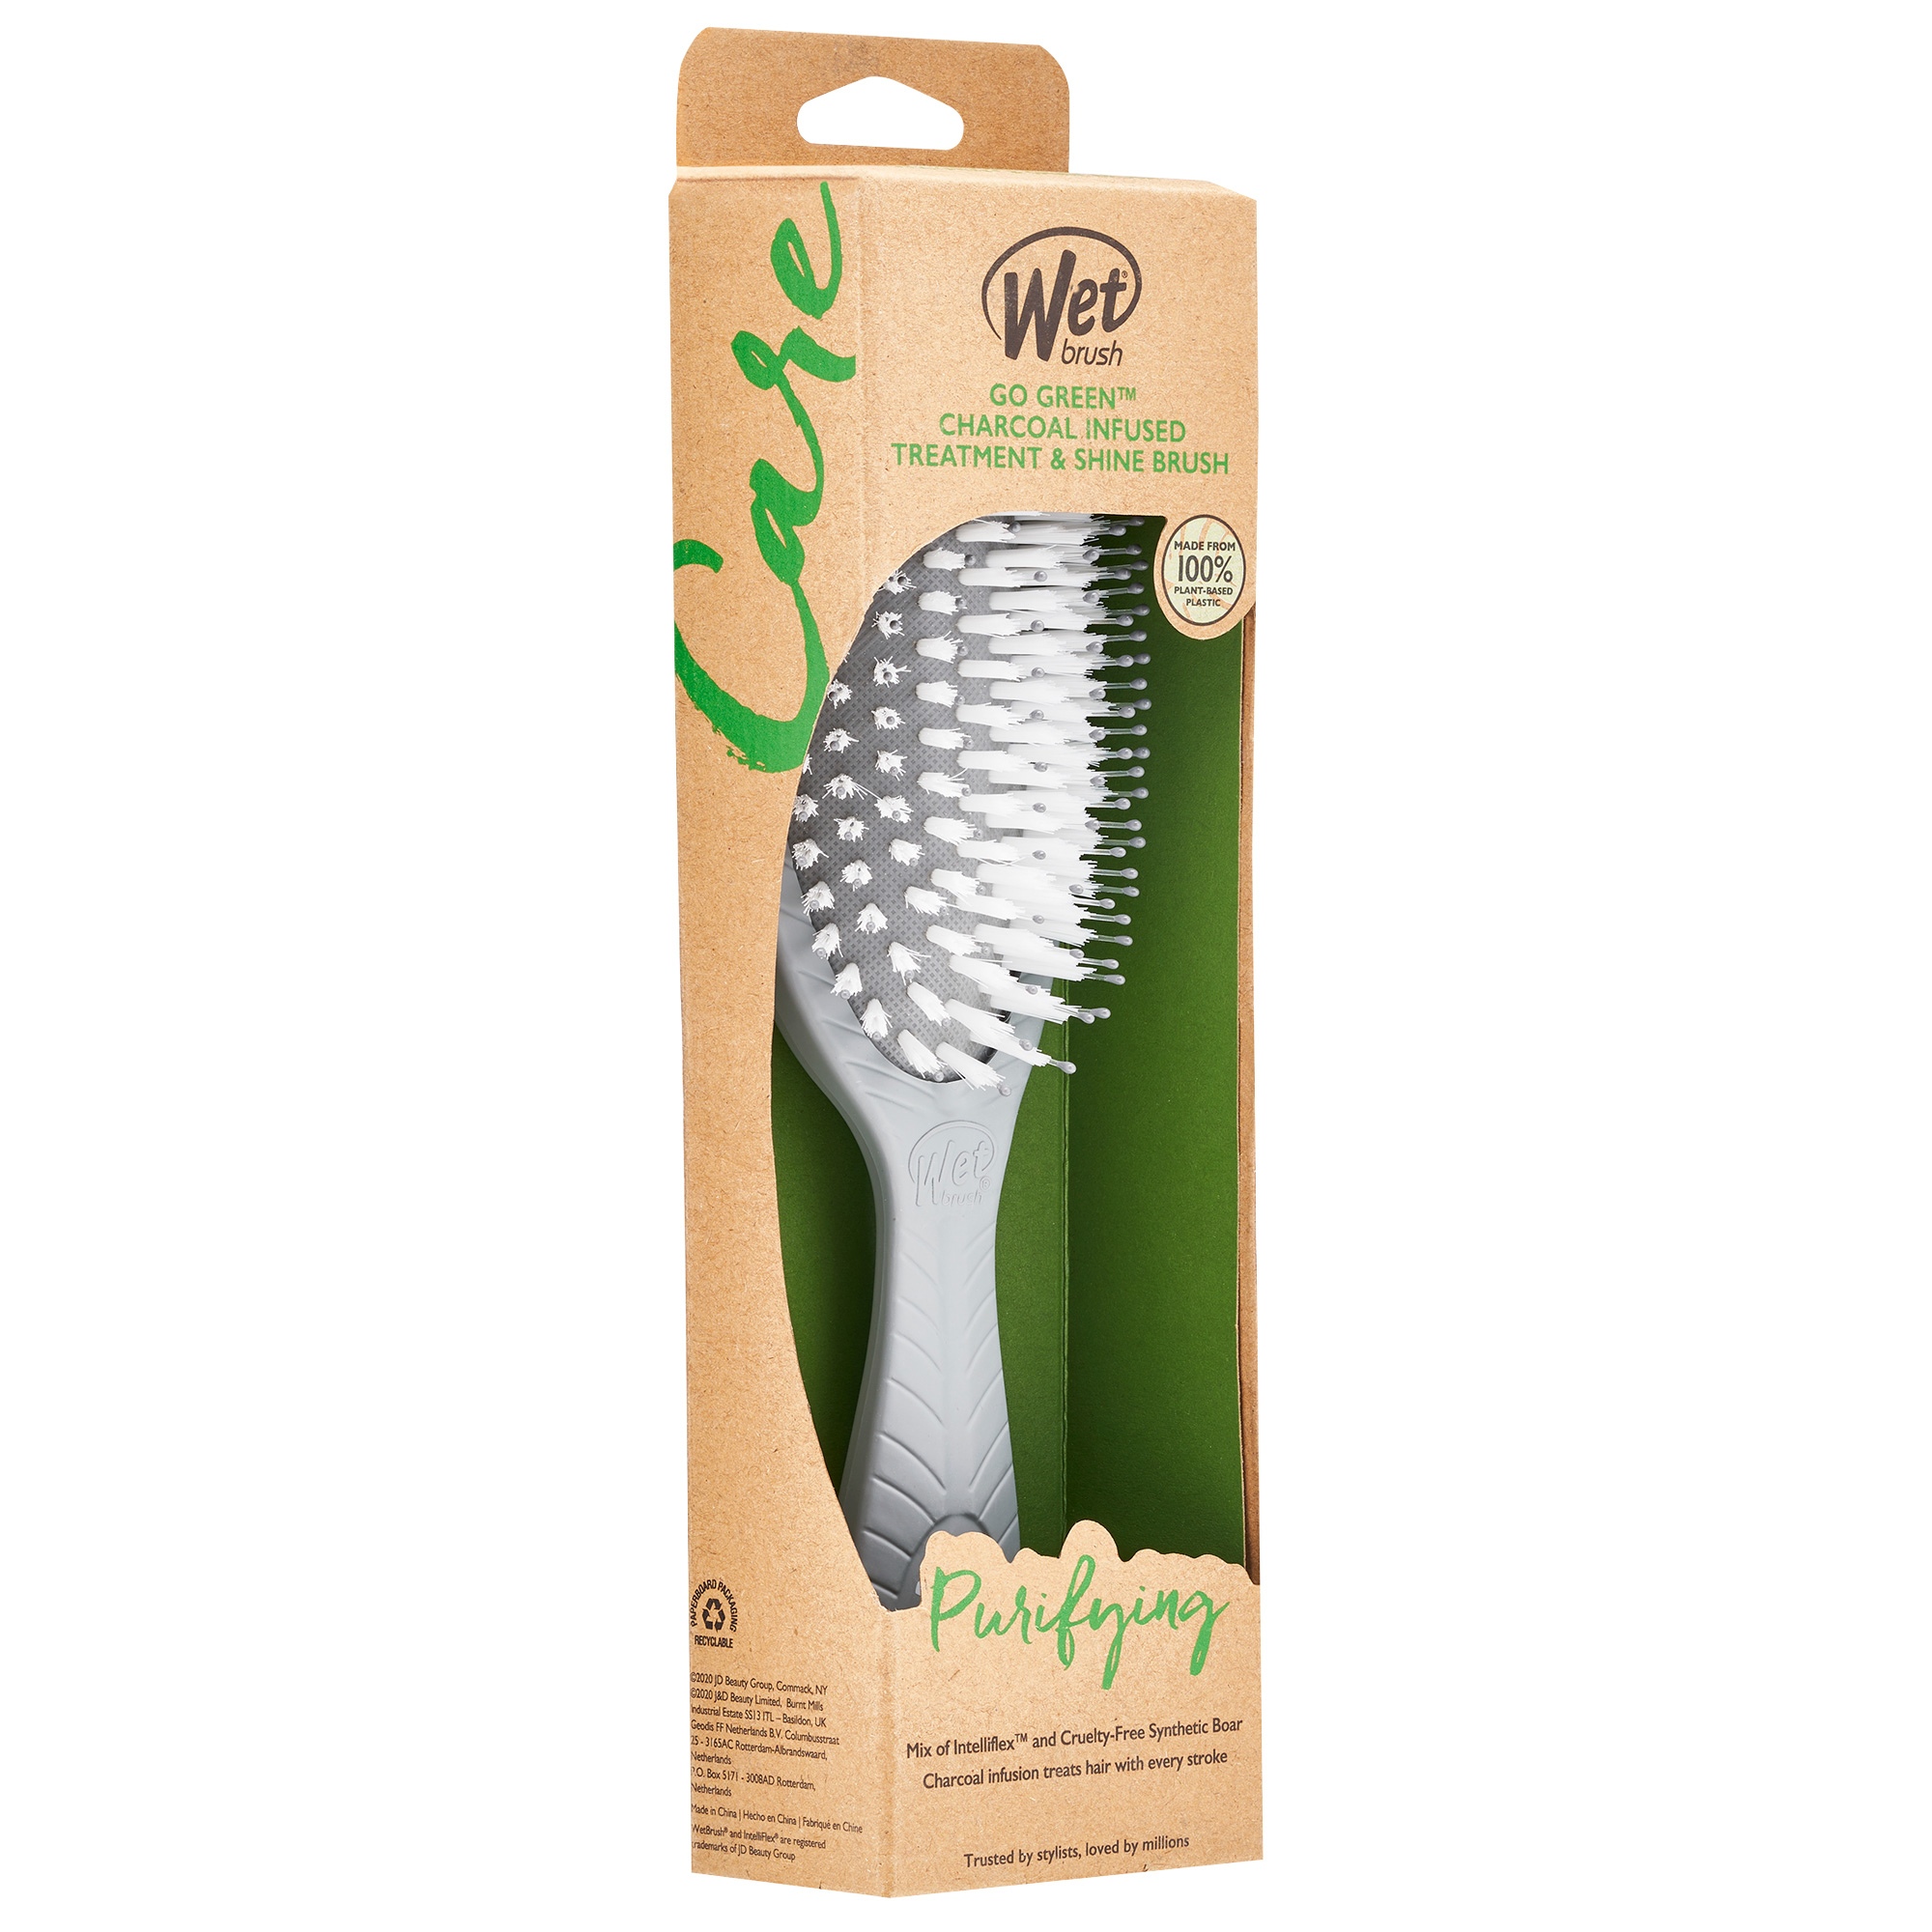 Wet Brush Go Green Treatment & Shine - Infused for Impurities - Charcoal -  1 item